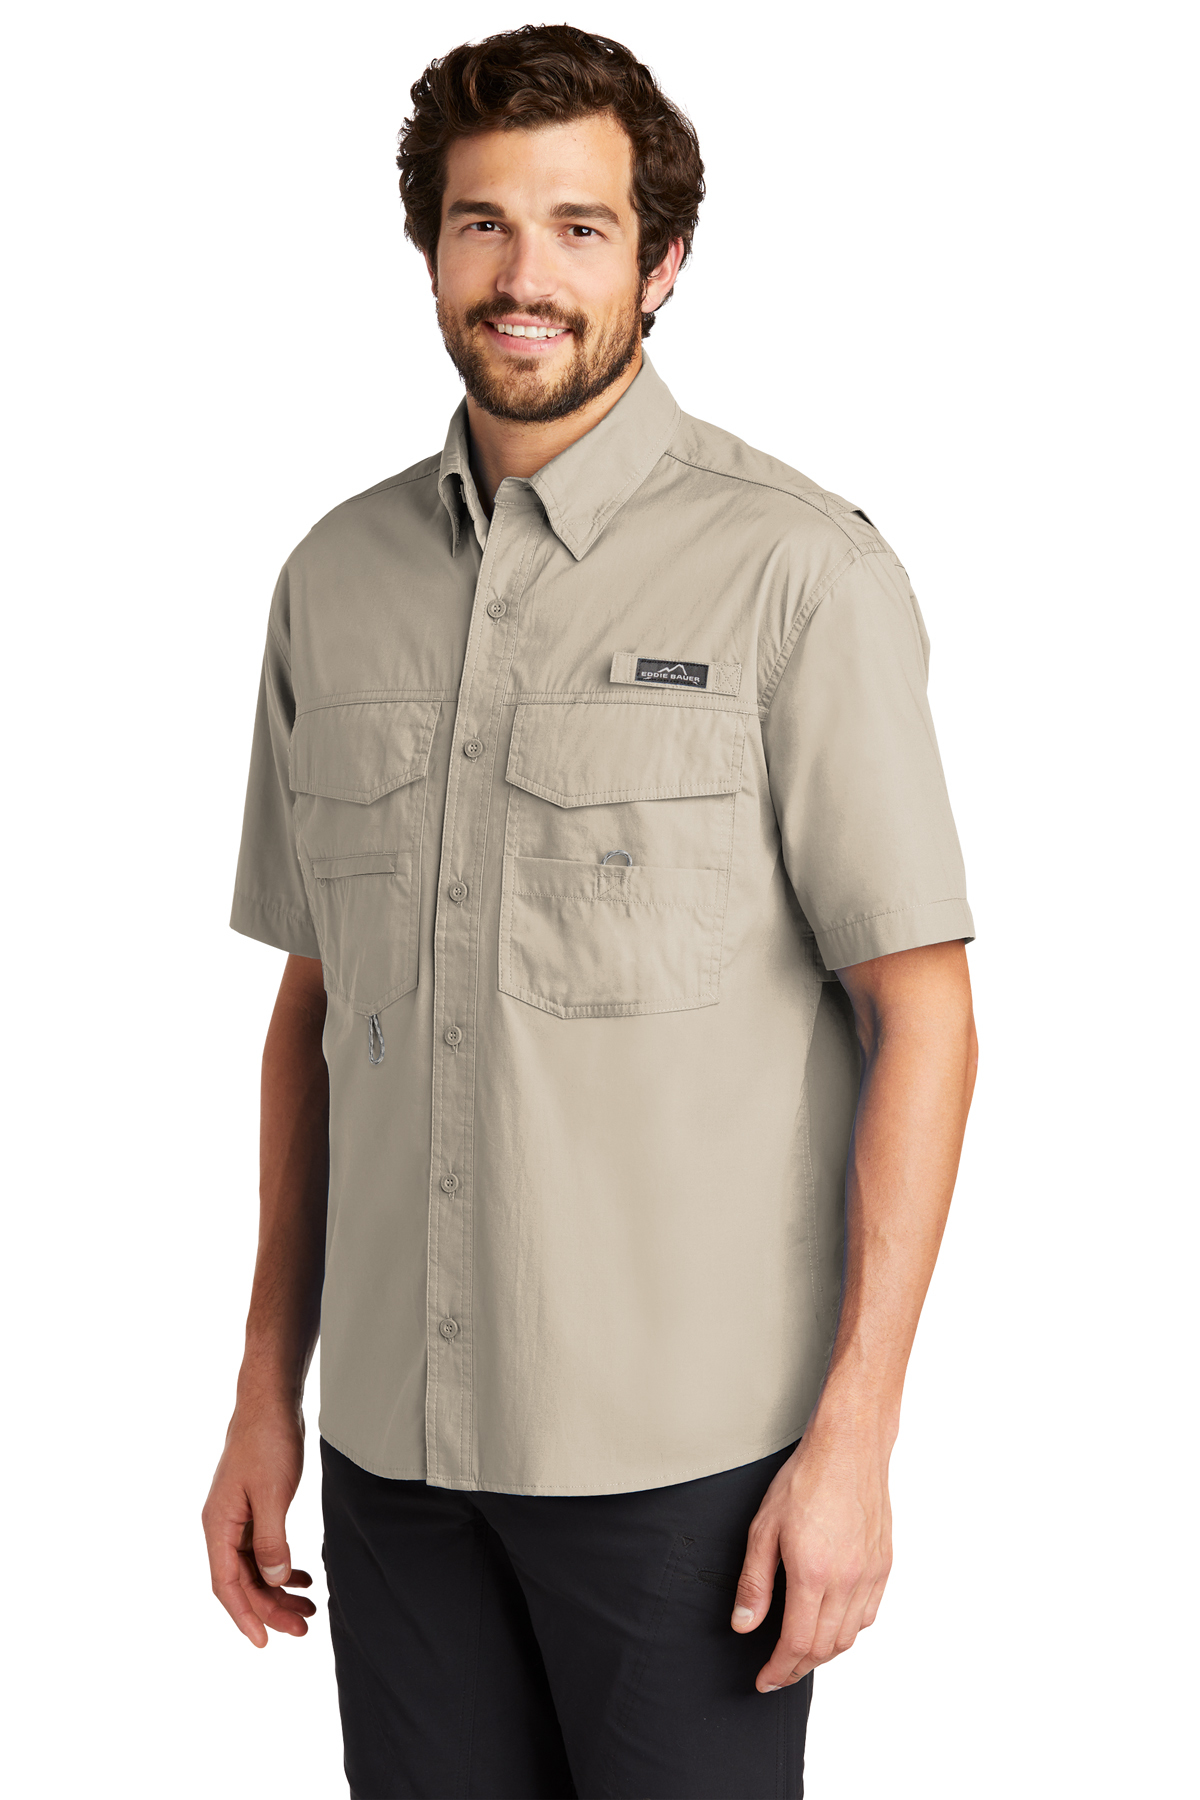 Eddie Bauer - Short Sleeve Fishing Shirt | Product | Company Casuals